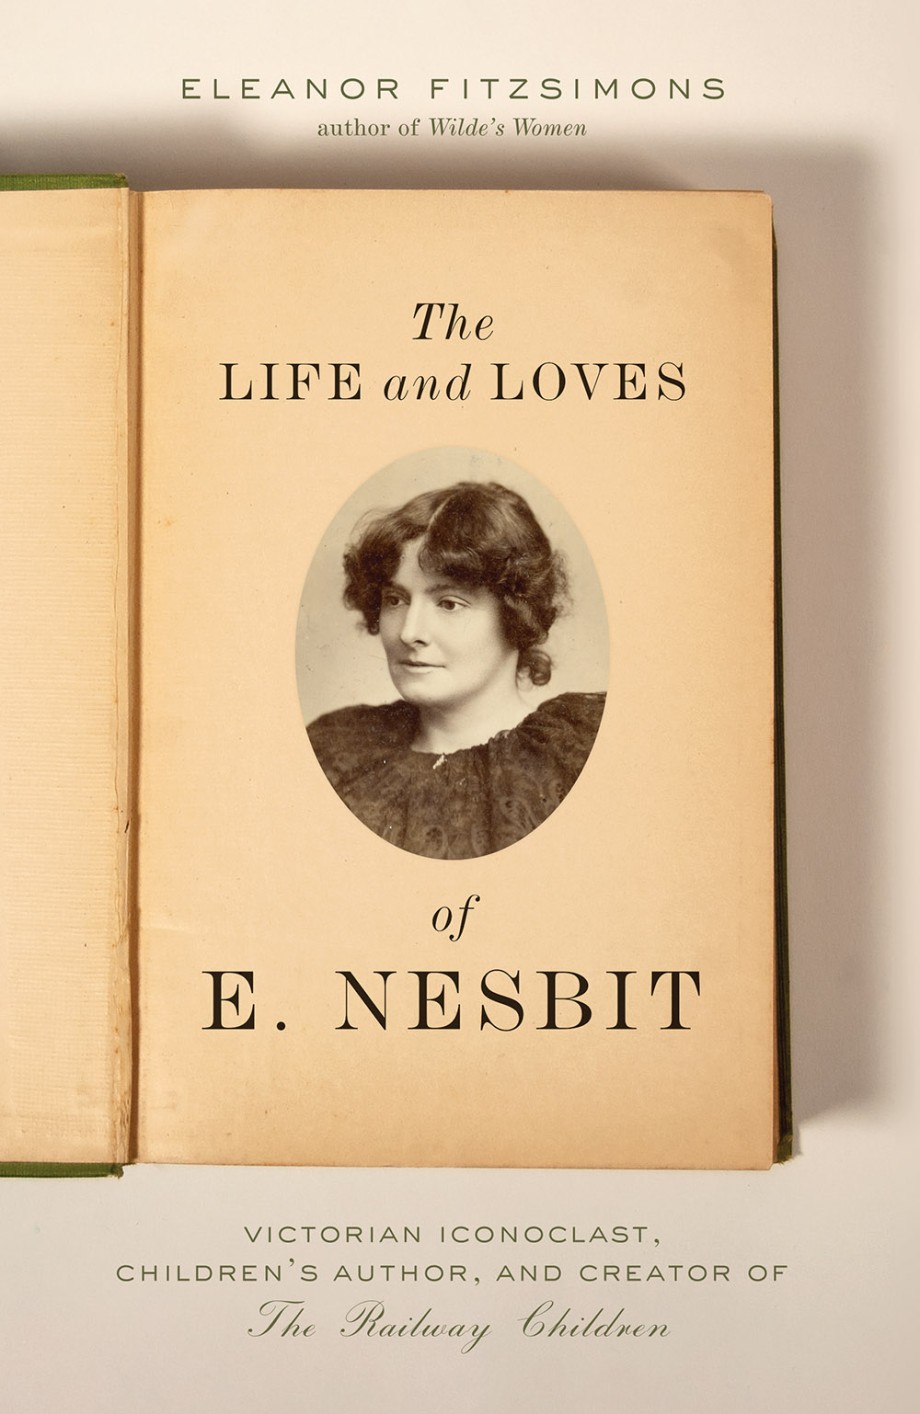 Life and Loves of E. Nesbit Victorian Iconoclast, Children’s Author, and Creator of The Railway Children